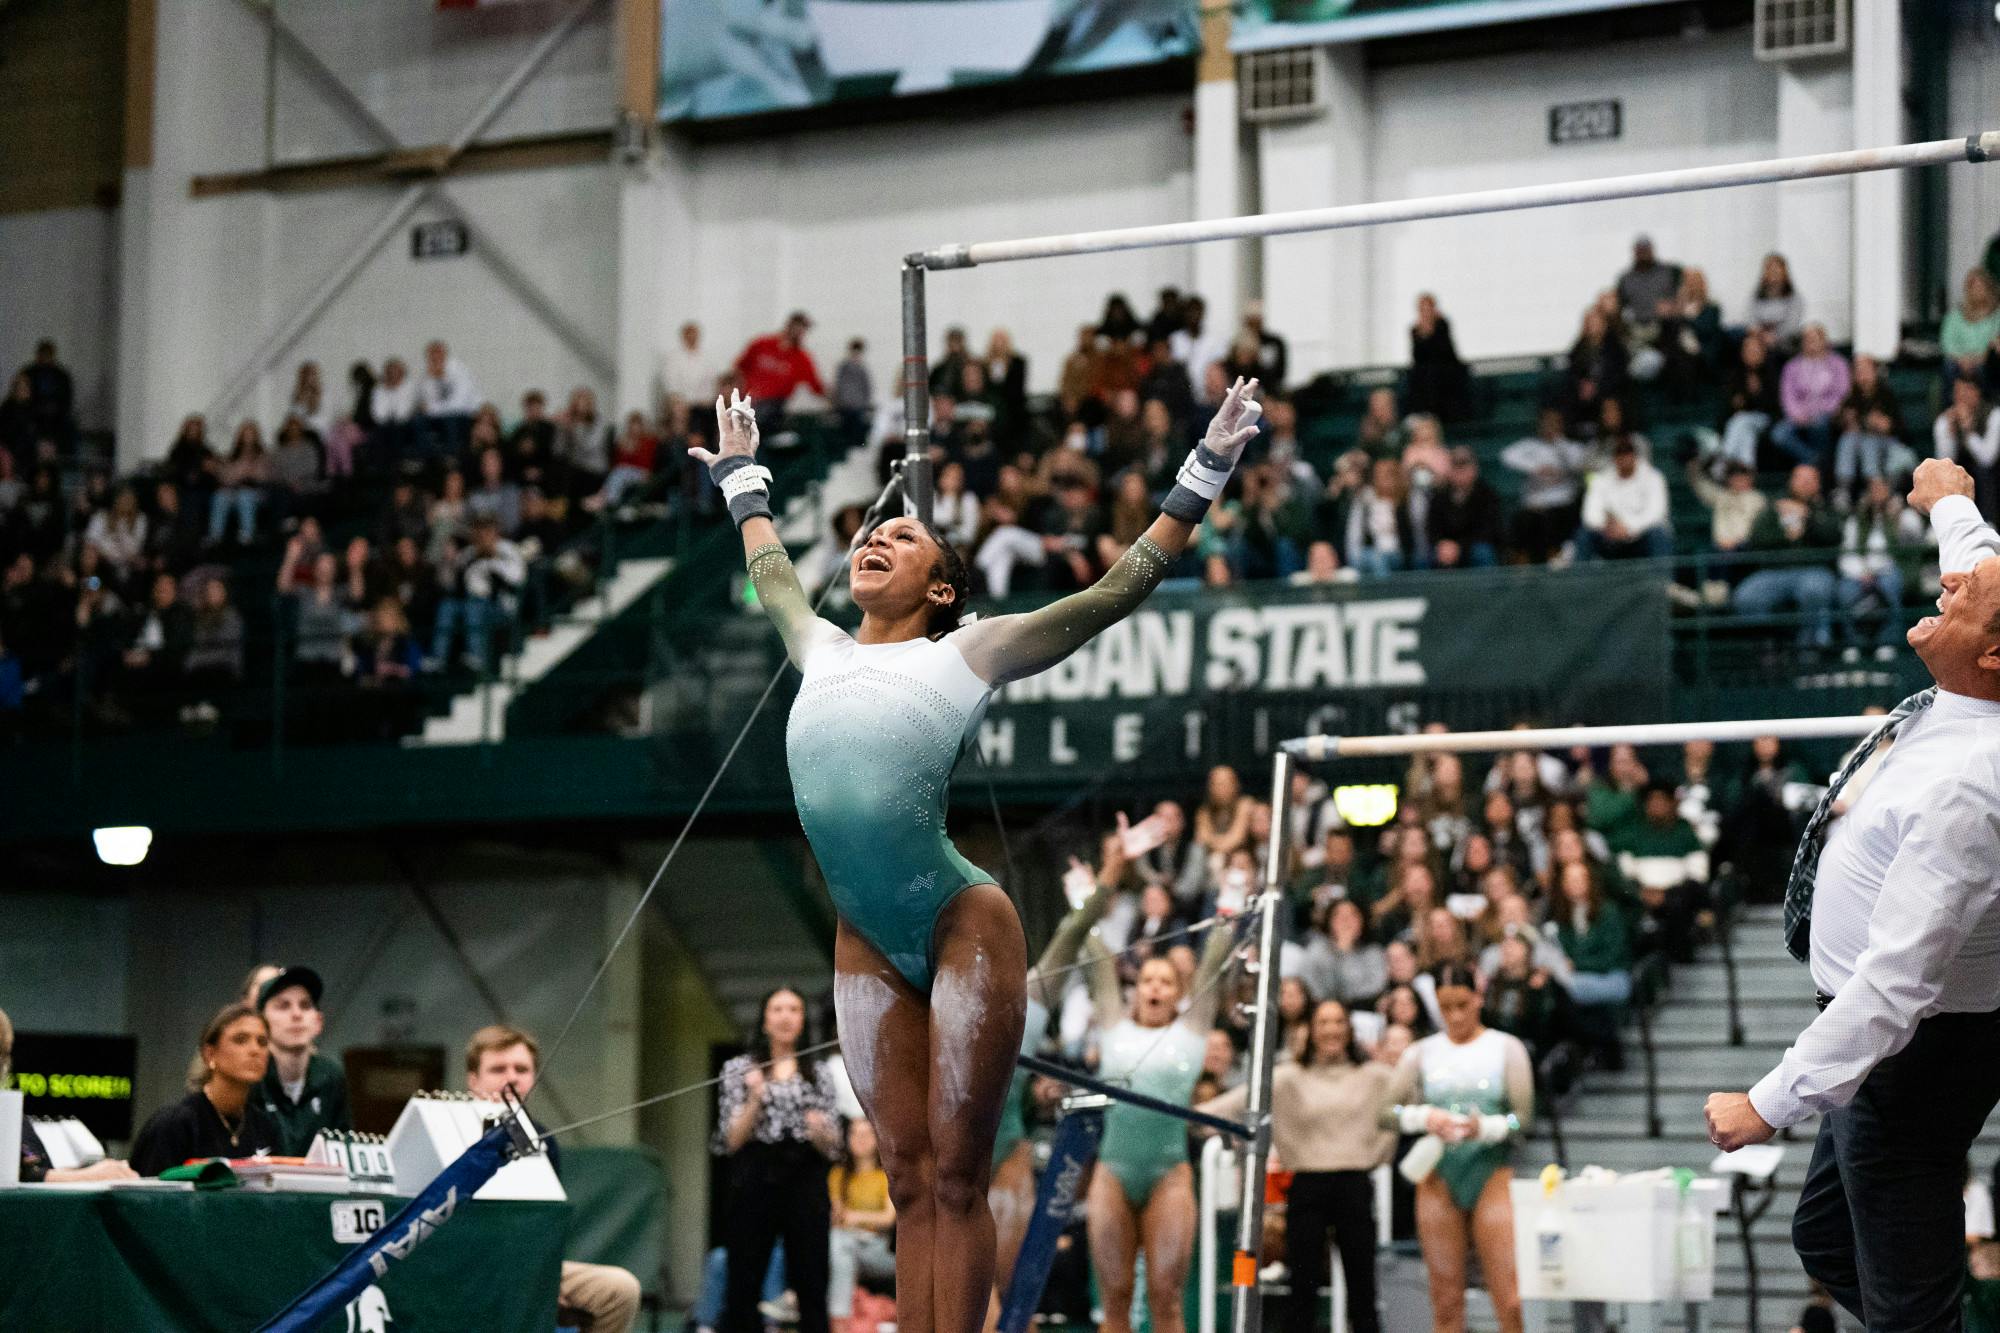 <p>Freshman All-Around Nikki Smith after finishing her dismount on the uneven bars at the MSU vs. Penn State meet at the Jenison Field House on Feb. 4, 2023. The Spartans beat the Nittany Lions 197.450 - 195.475.</p>